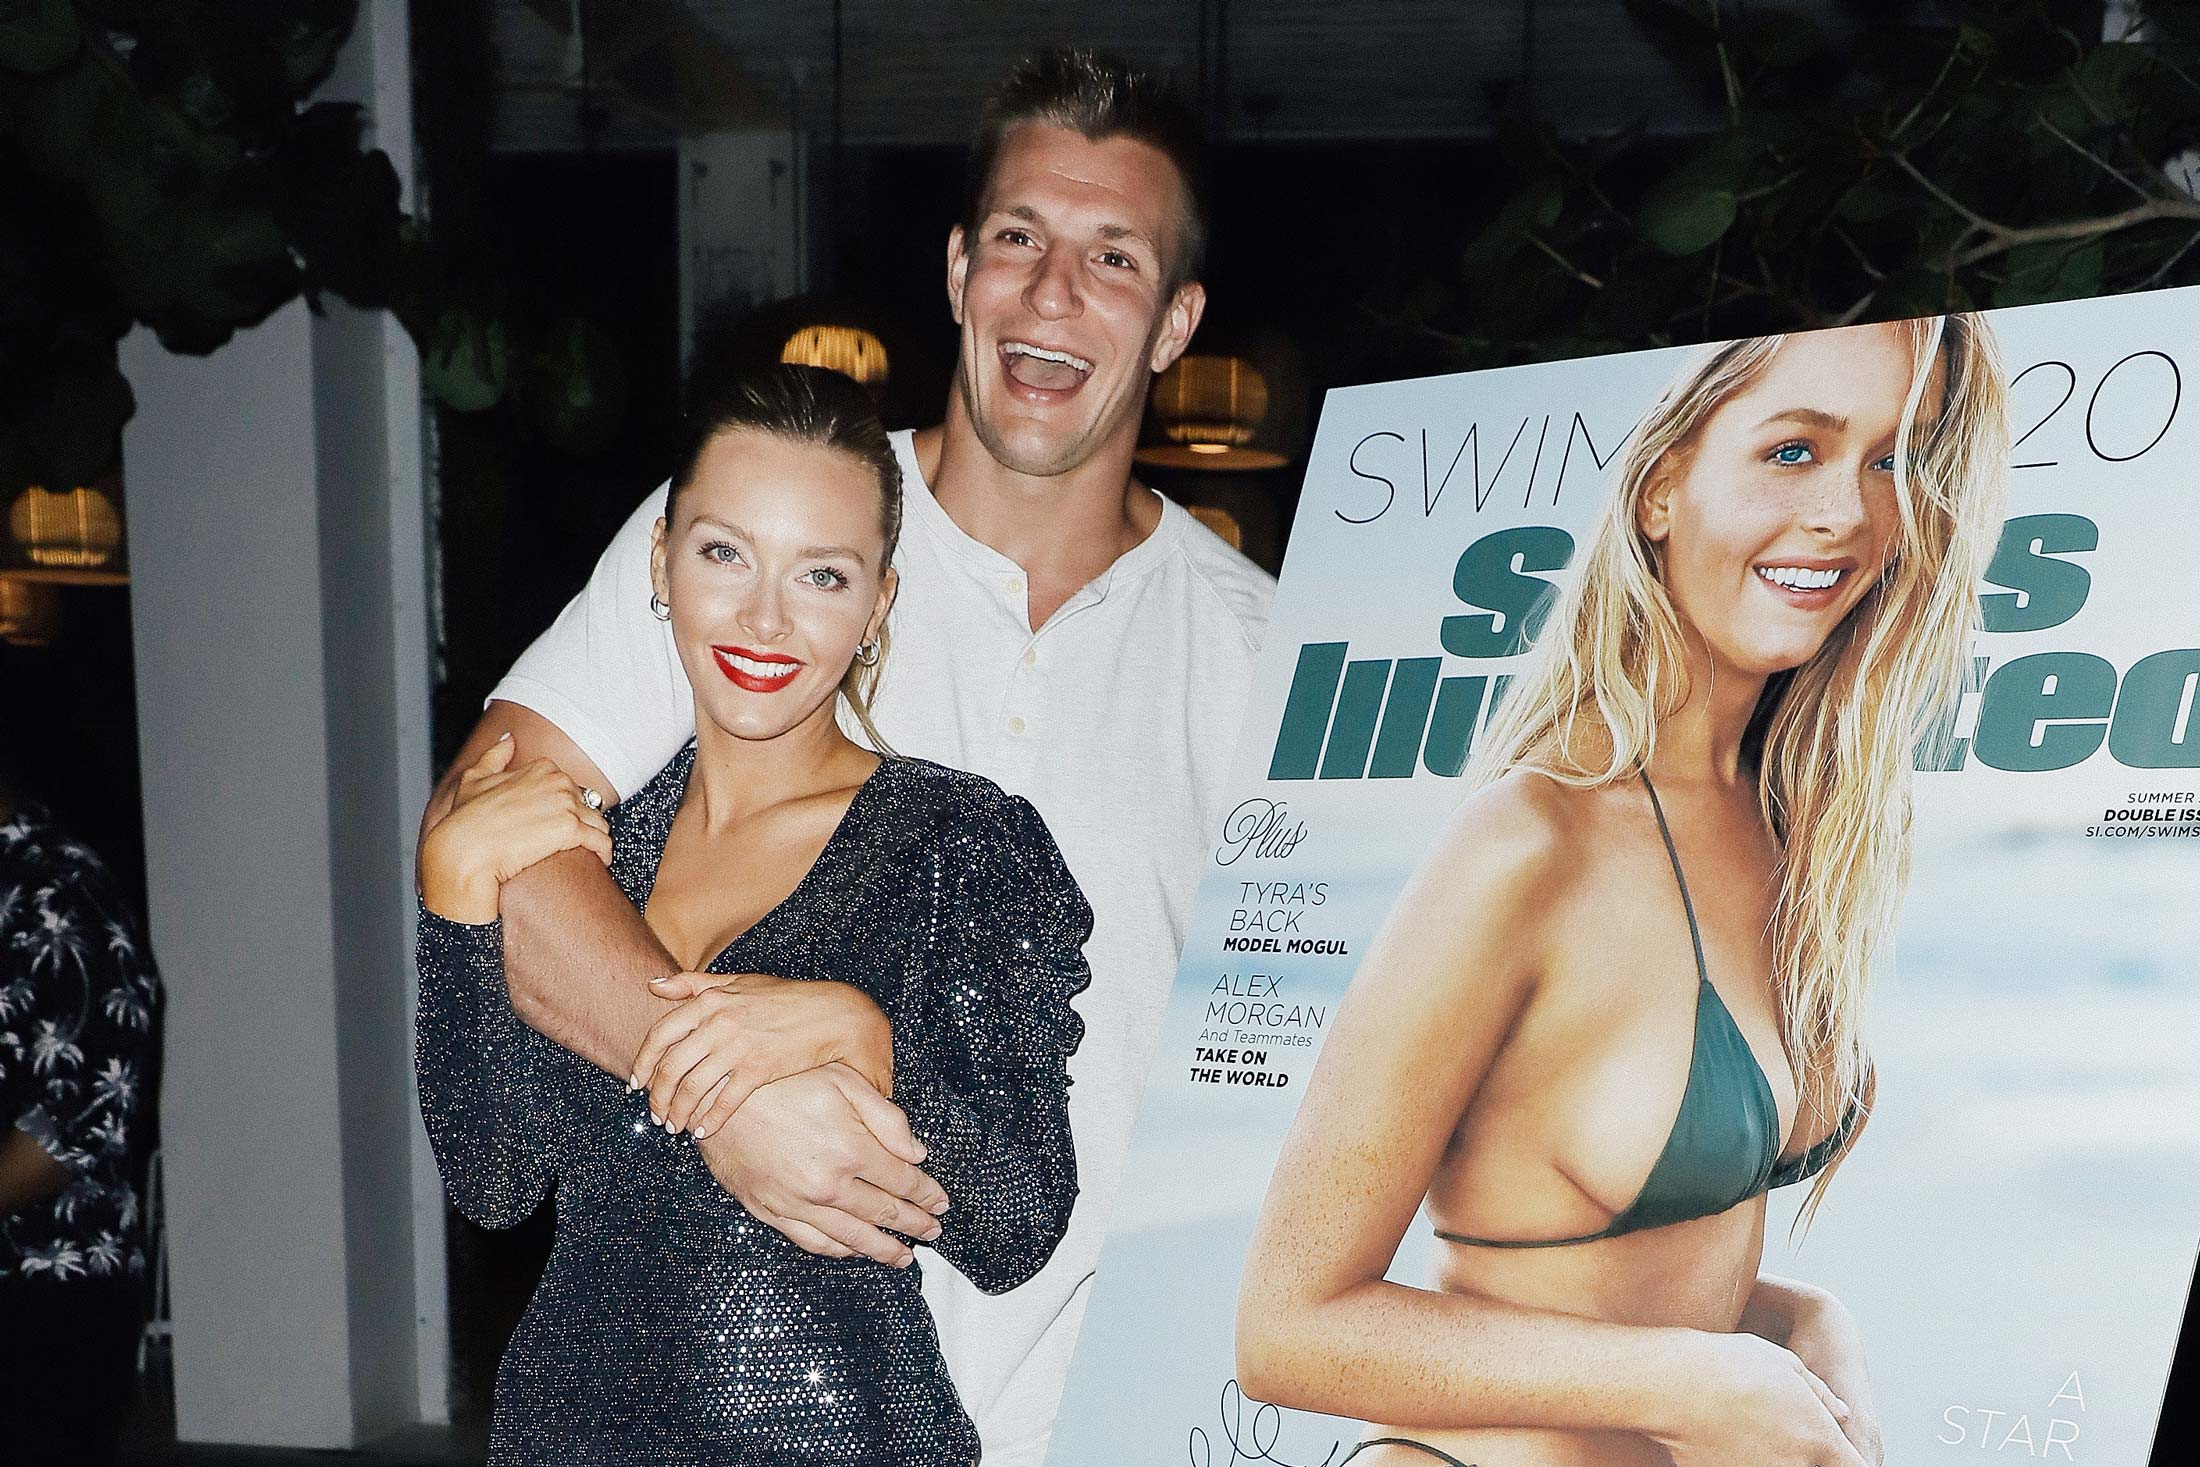 Rob Gronkowski and Camille Kostek embrace in front of a poster of her Sports Illustrated cover.